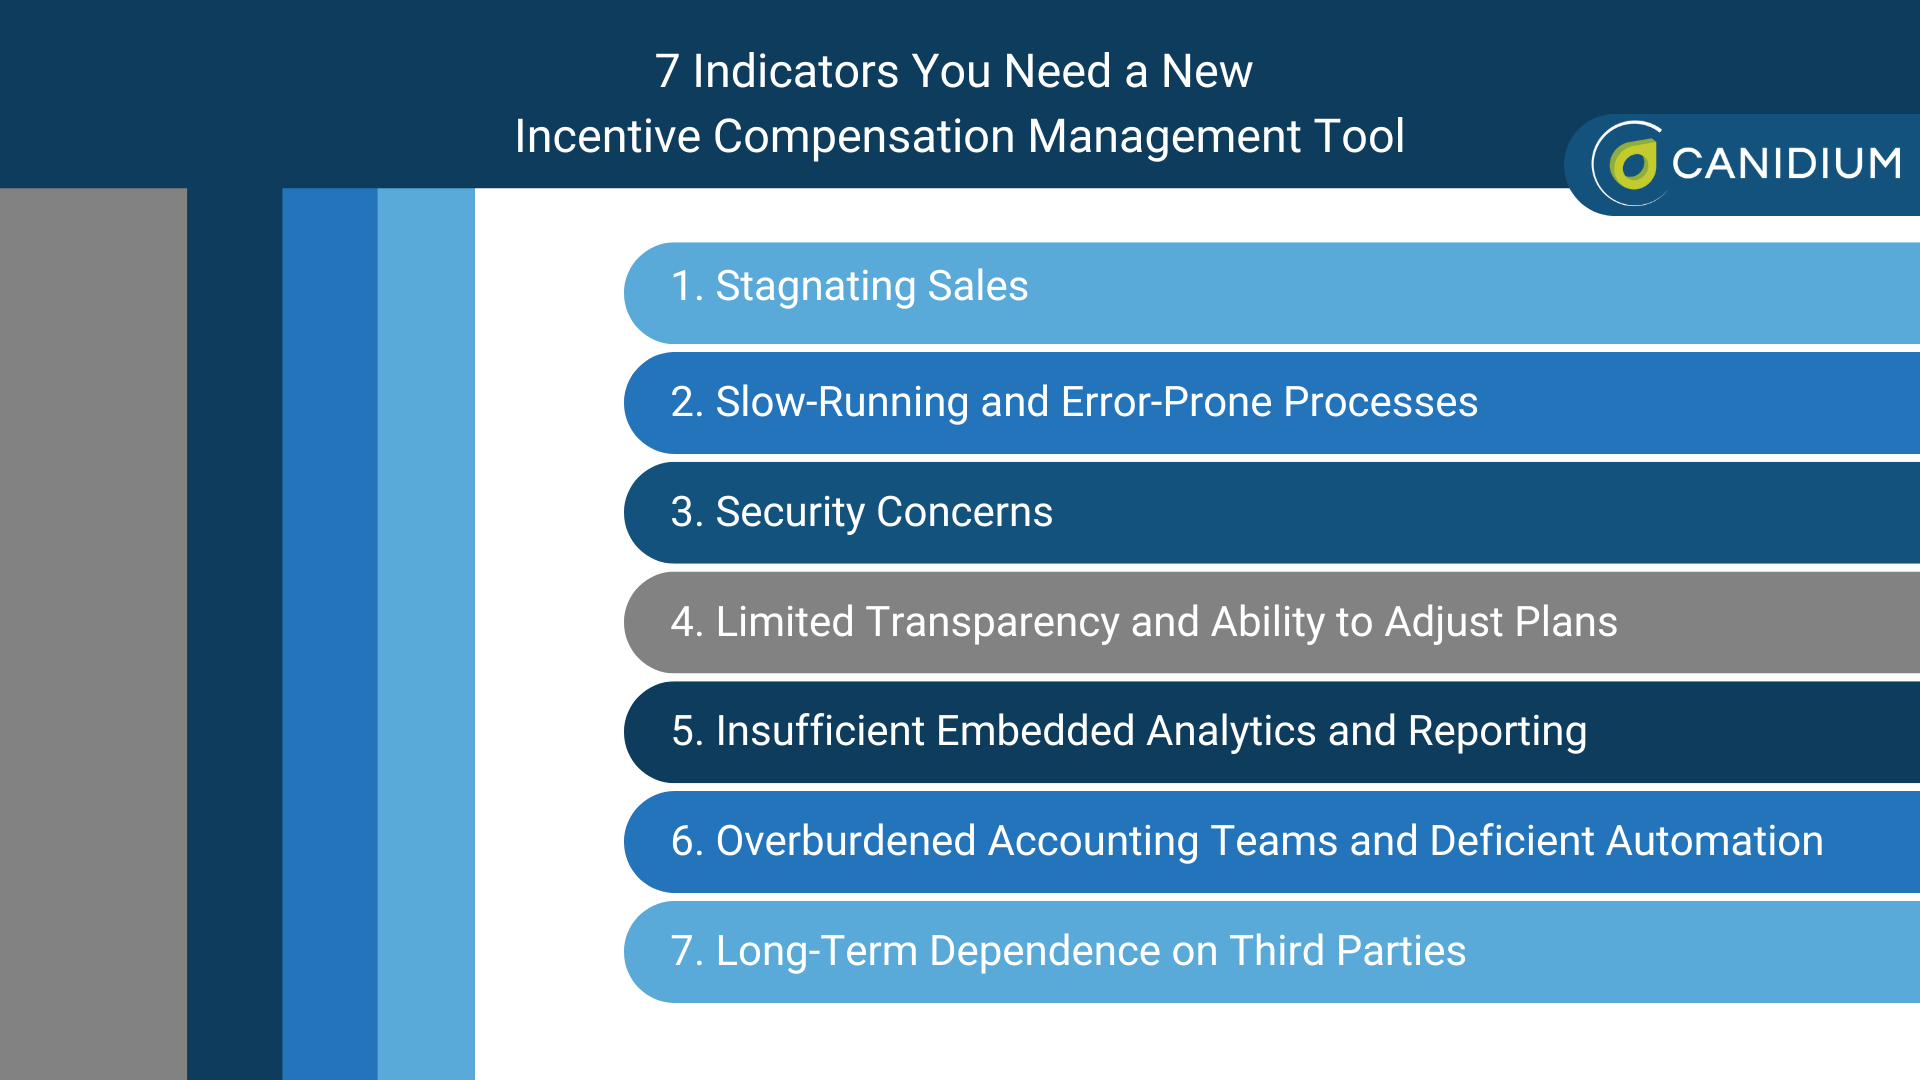 7 Indicators You Need a New Incentive Compensation Management Tool